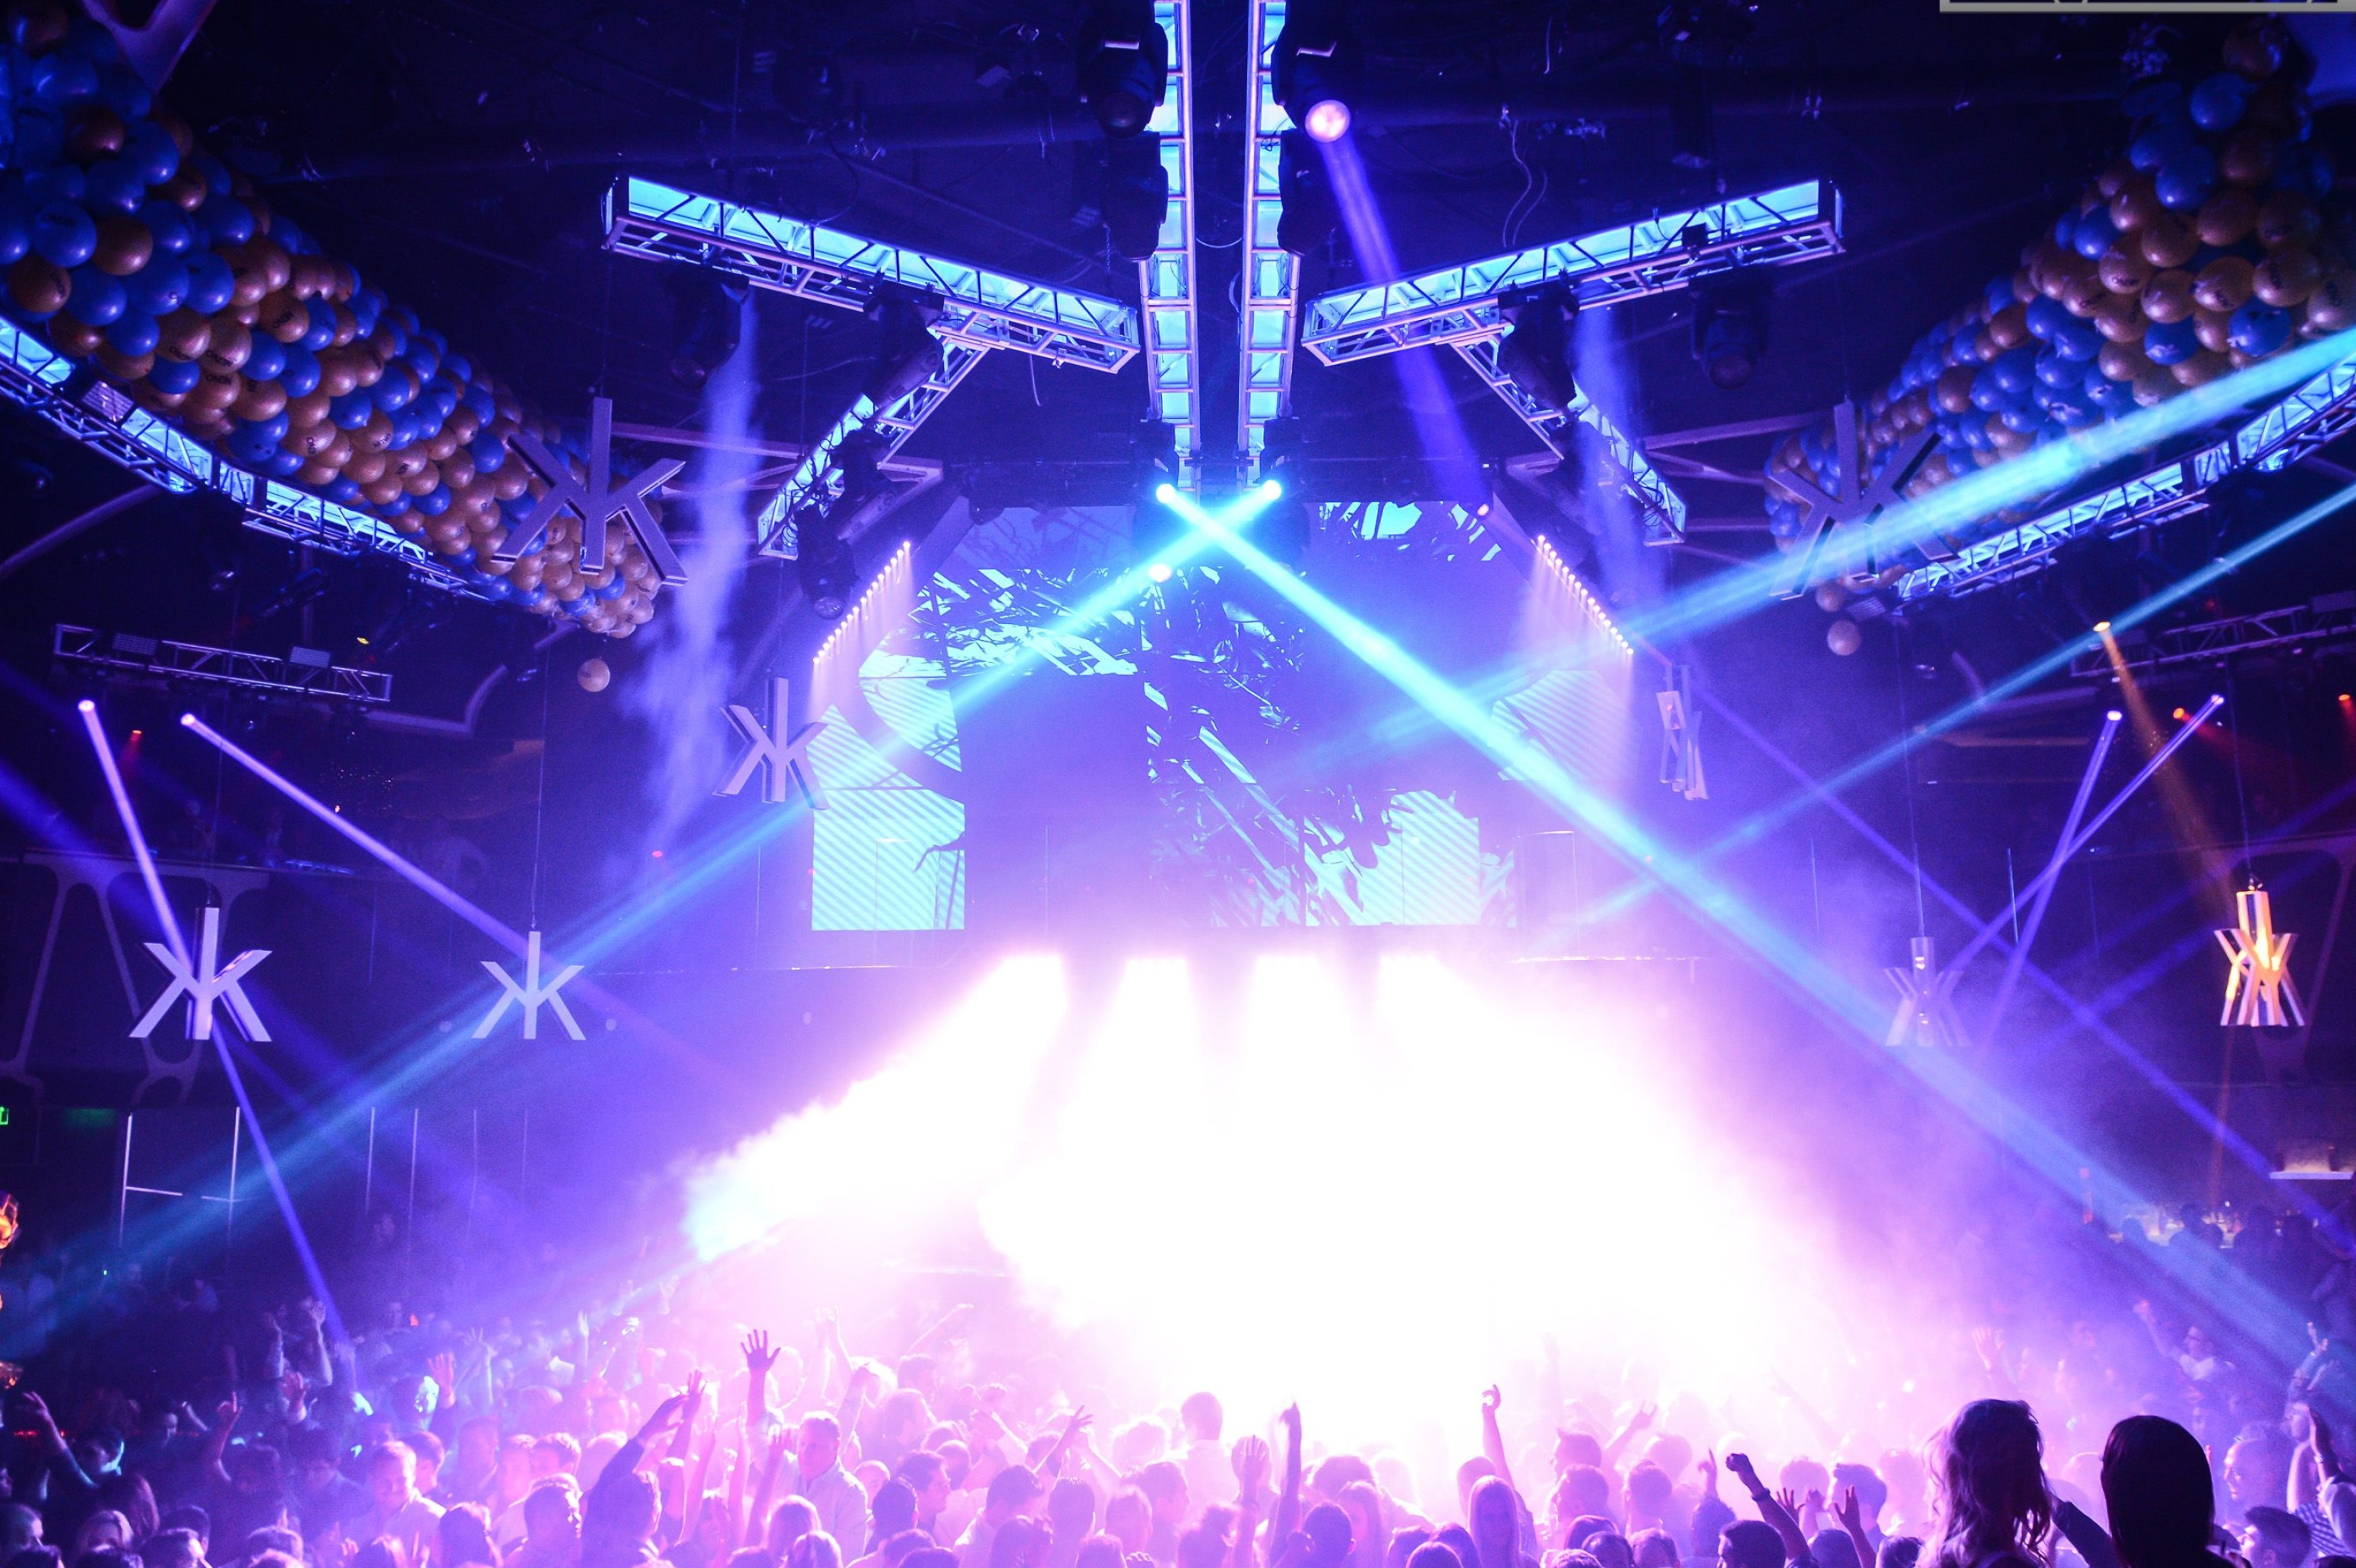 Nightclub: Dancing, Rave music party, Discotheque, Electronic dance music. 3100x2070 HD Wallpaper.